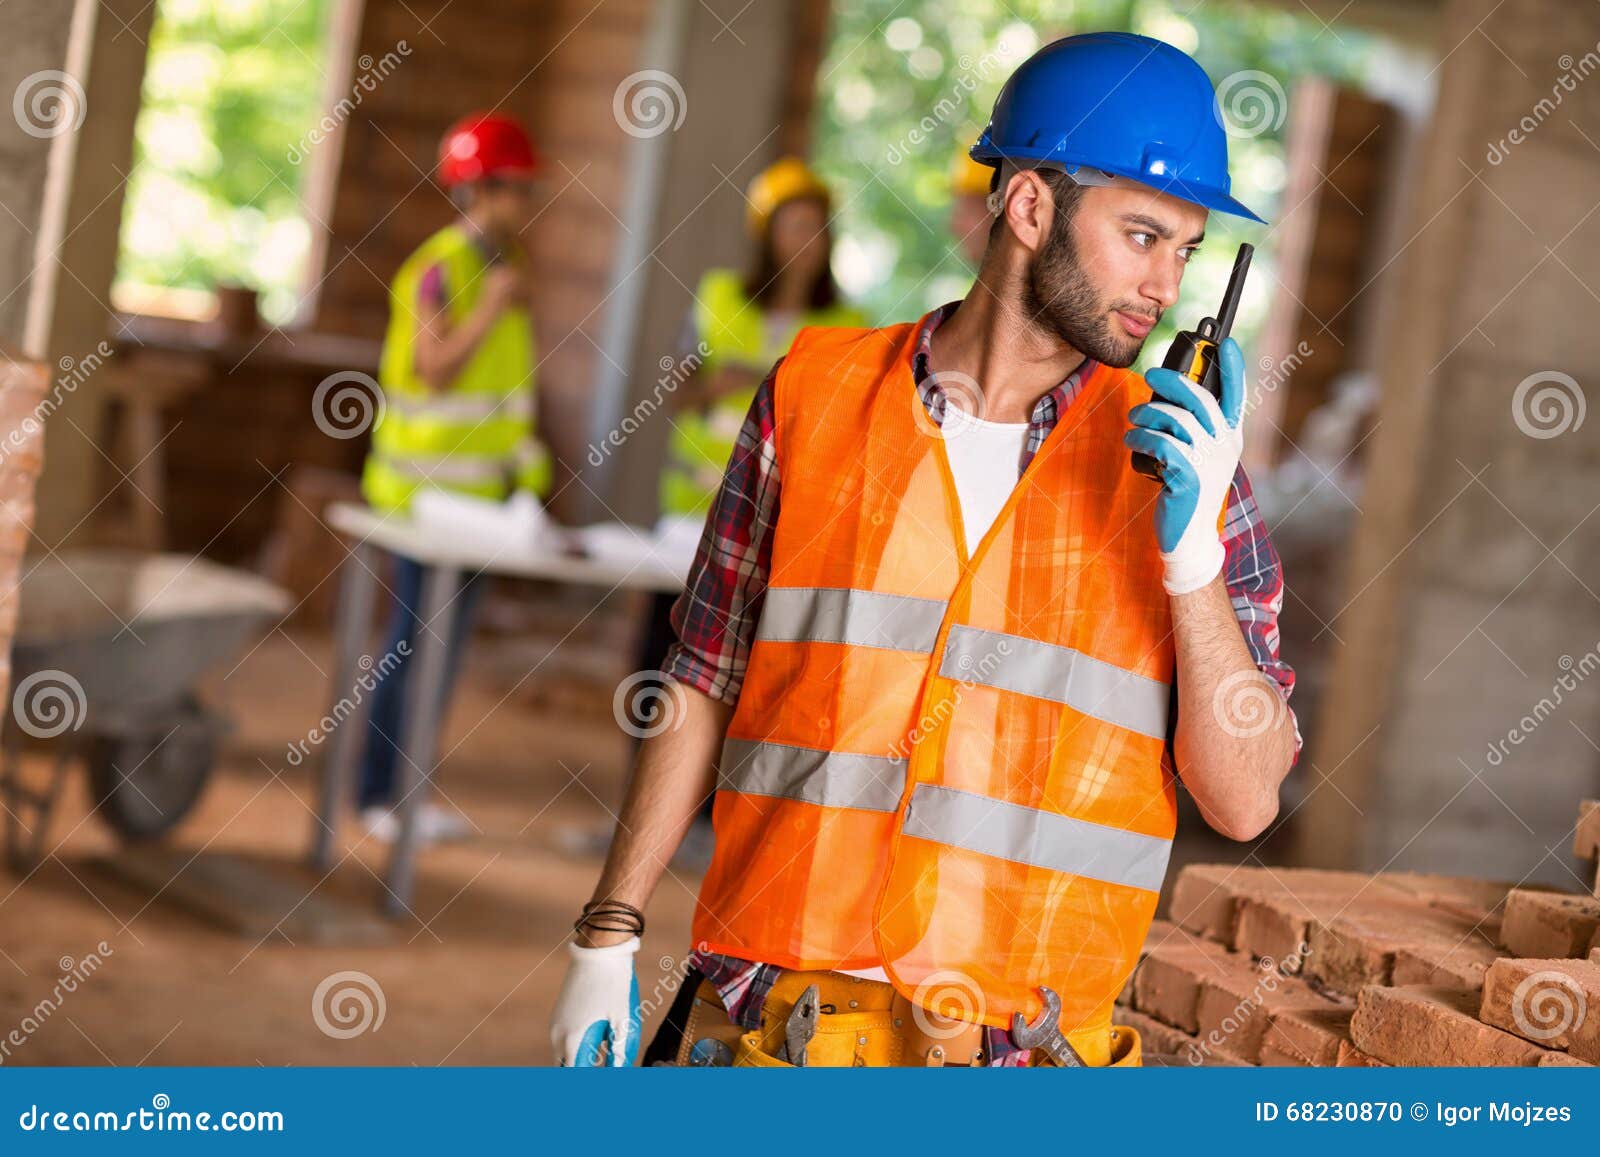 construction worker talking on walkie talkie at site